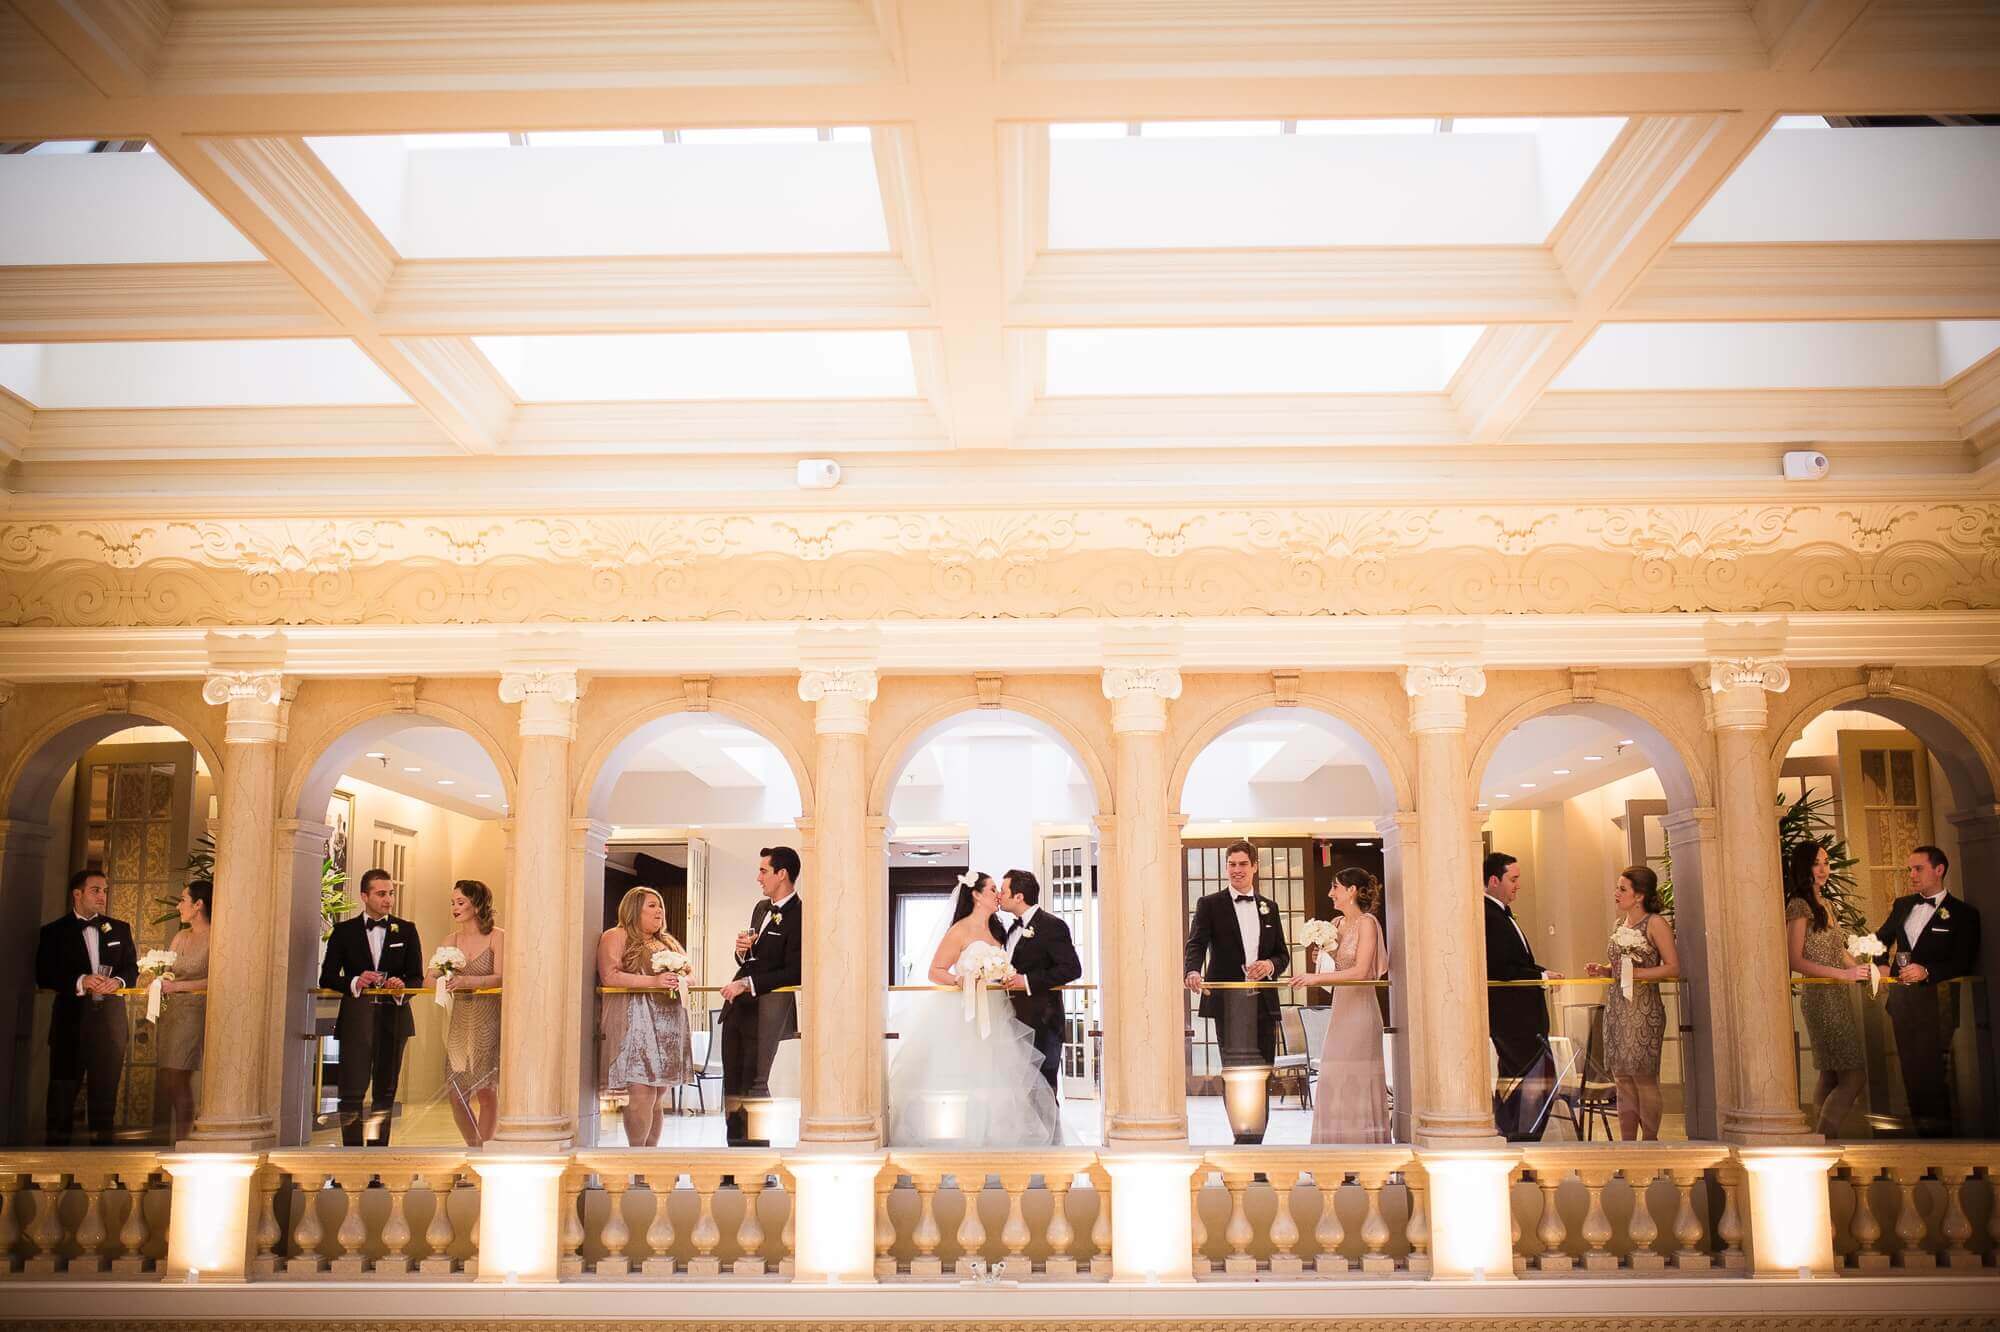 Portrait of the bride, groom and their wedding party, separated in between the columns at the Omni King Edward Hotel in Toronto